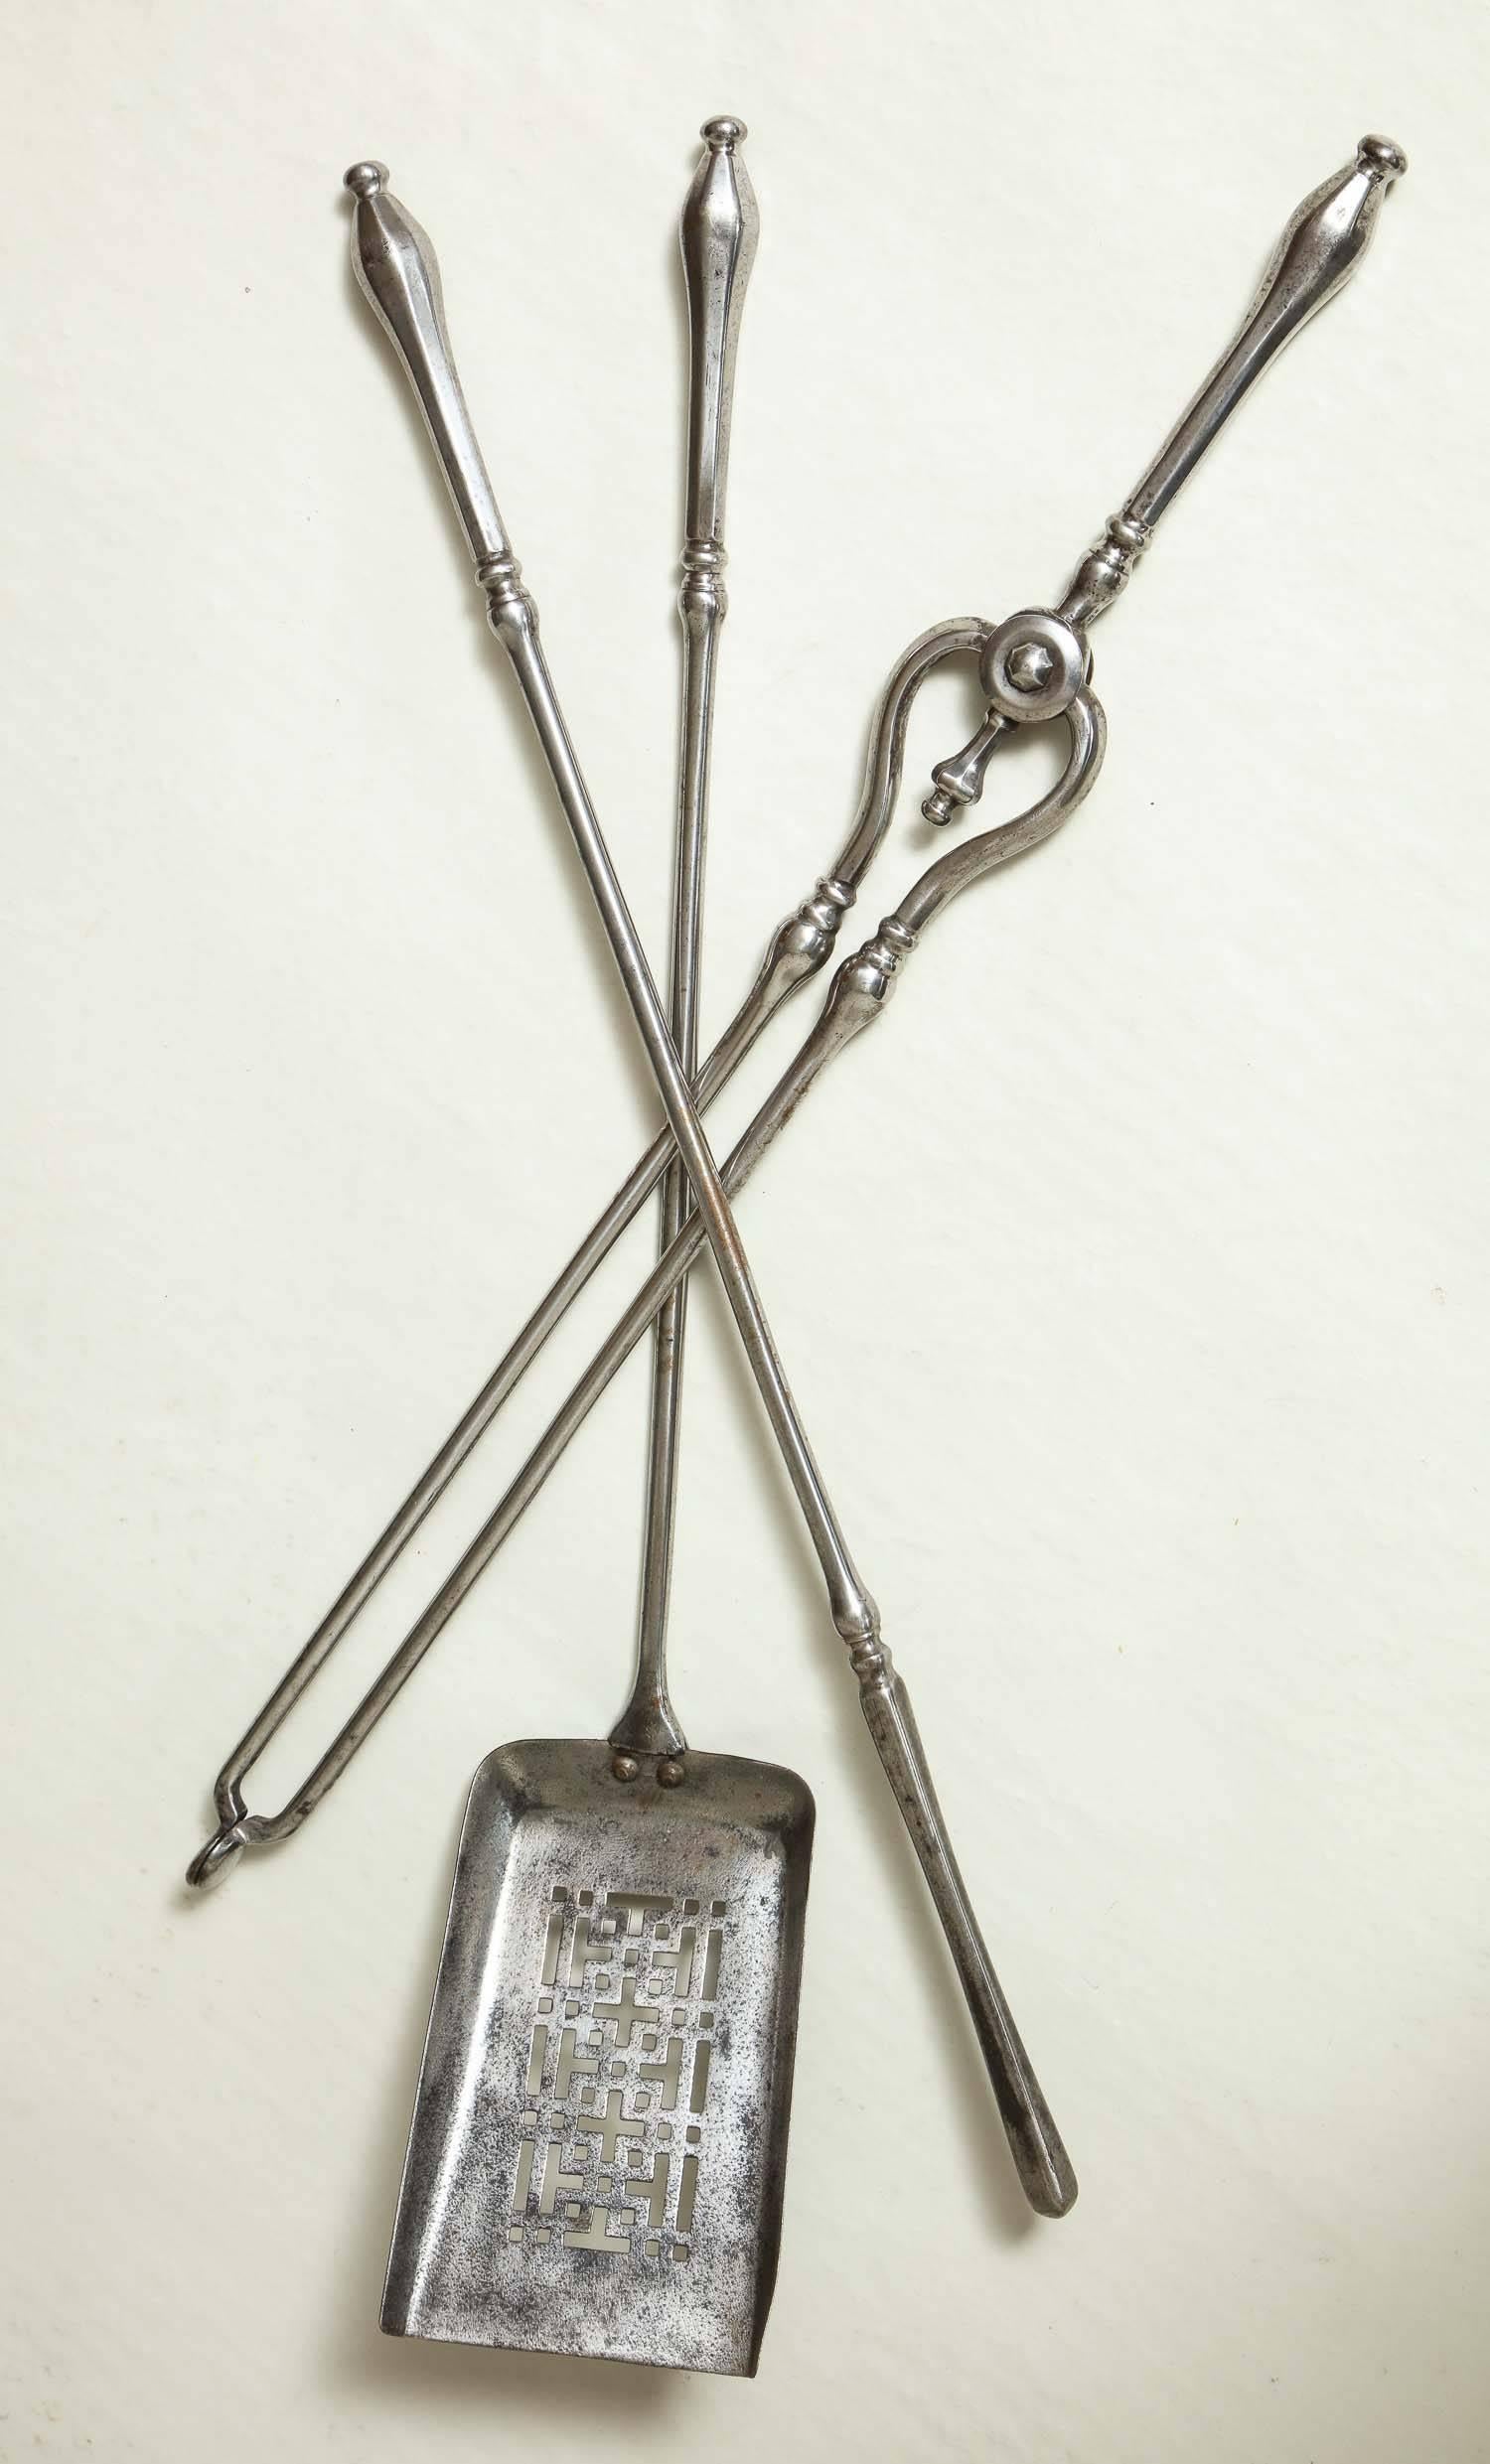 Fine set of George III period firetools in gunmetal steel with hexagonal teardrop handles, comprising a pair of tongs, poker and shovel, the latter with Chinese fretwork piercing to the bowl, England, circa 1800.